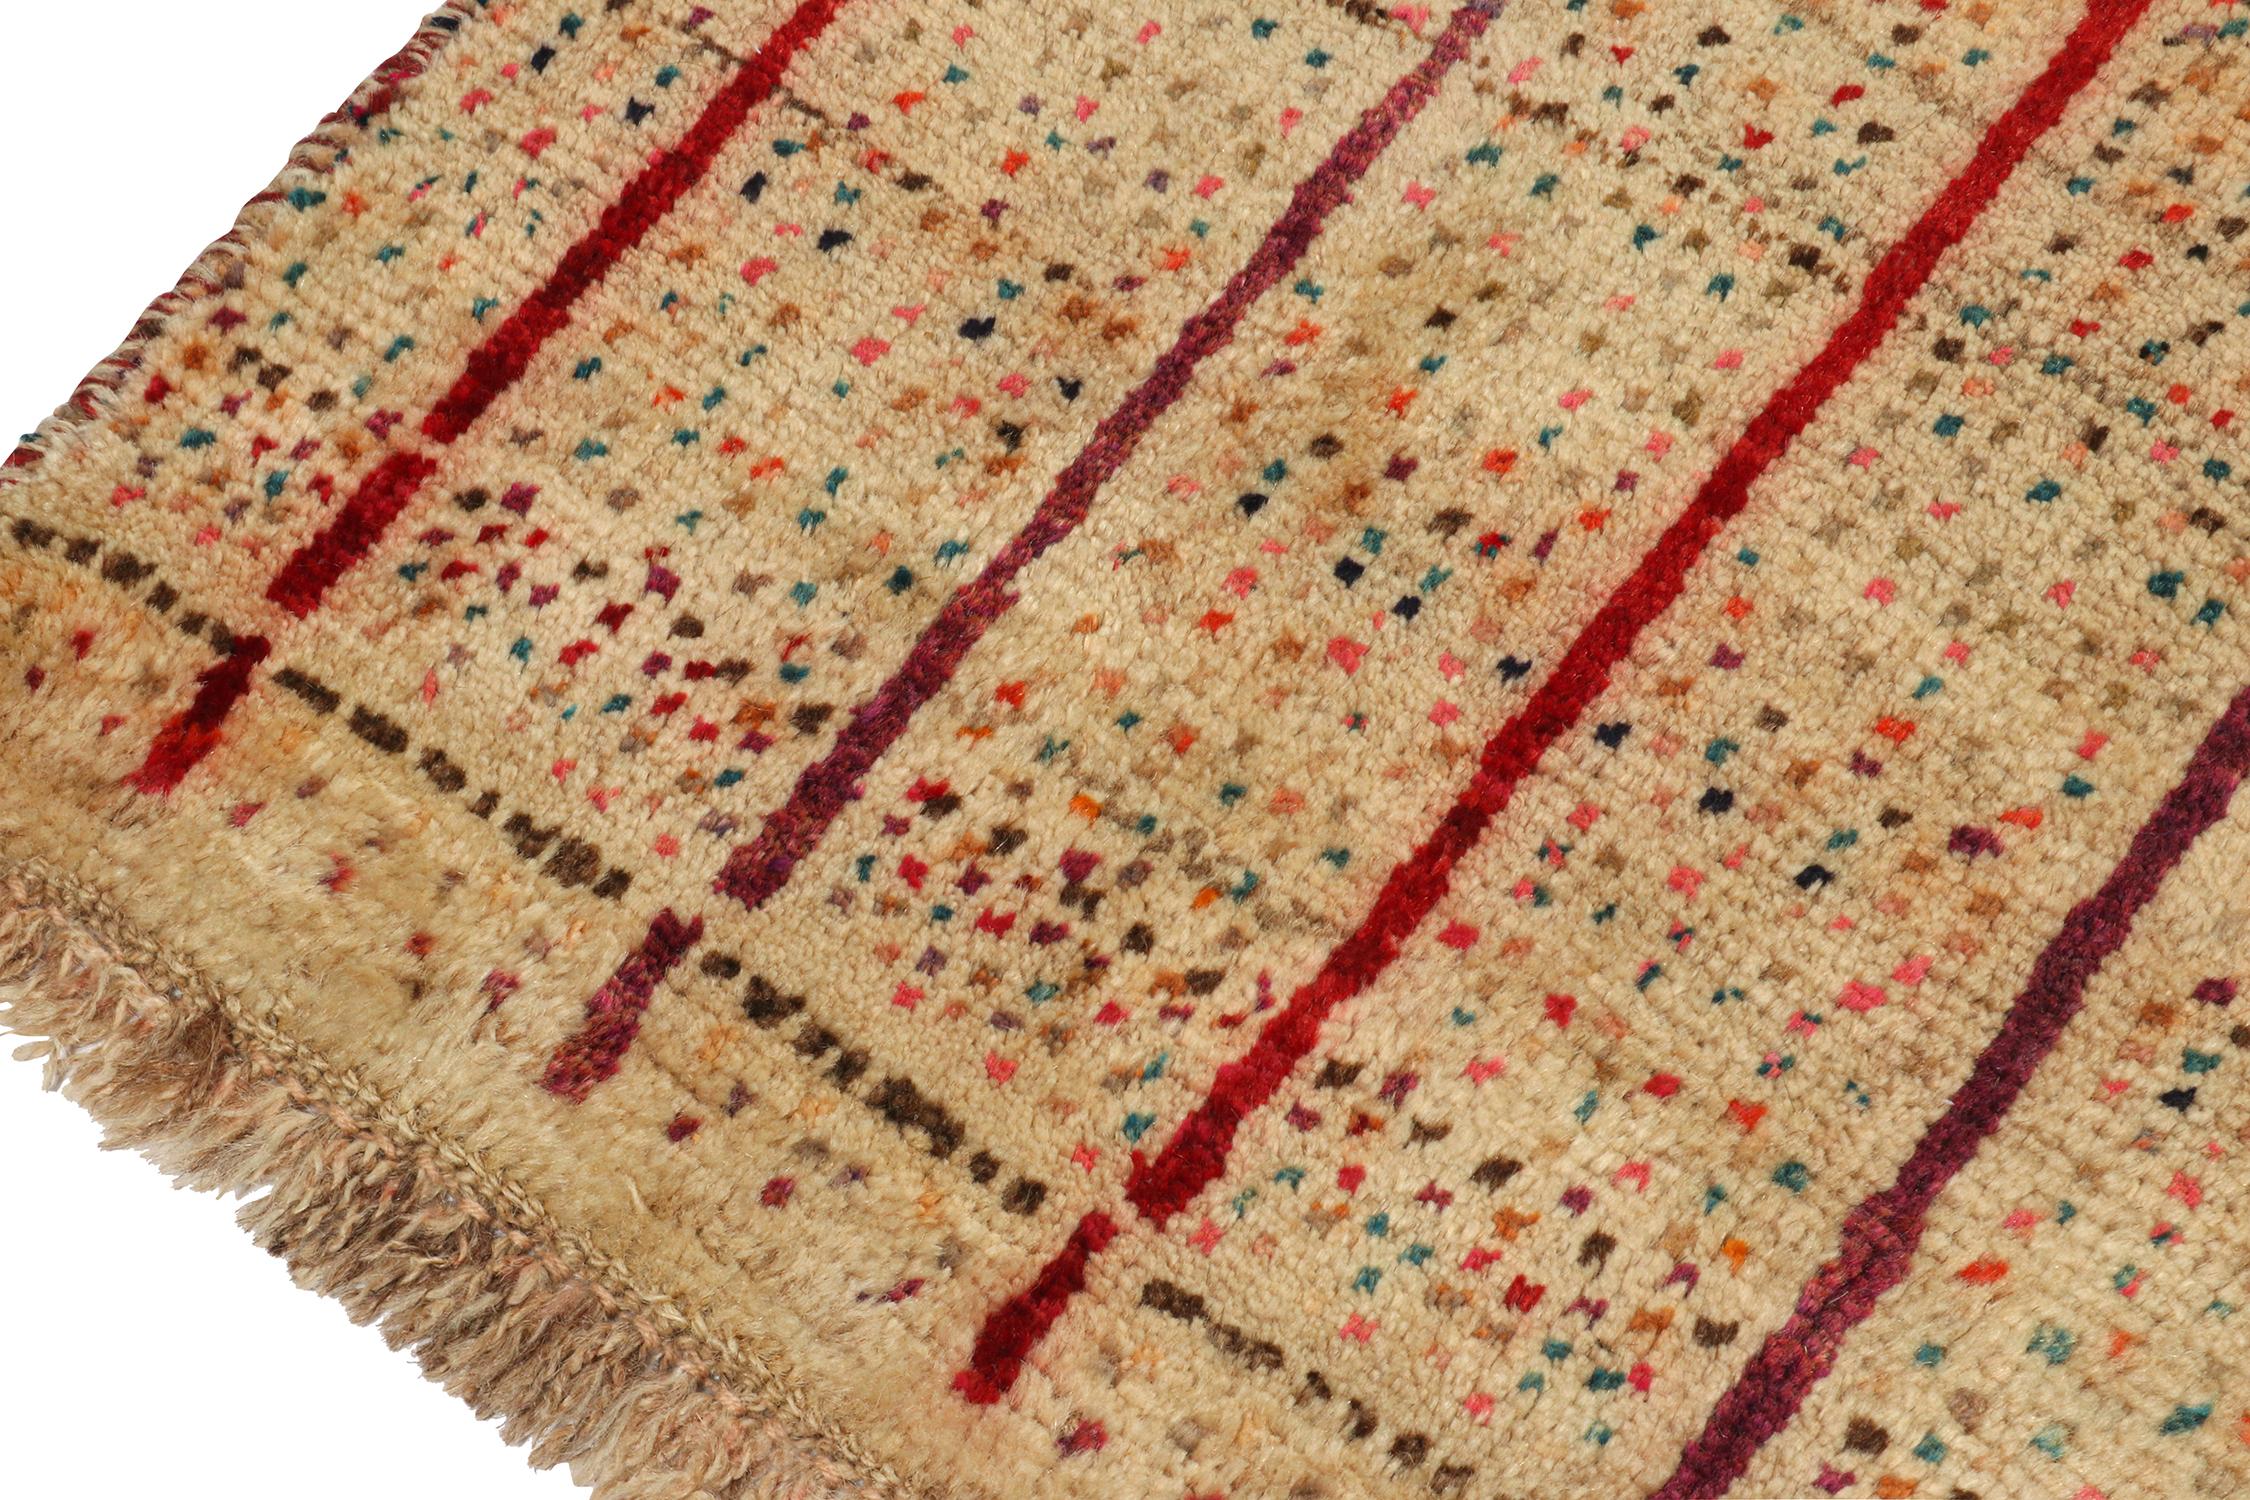 Vintage Gabbeh Tribal Rug in Beige- Red Stripes and Colorful Dots by Rug & Kilim In Good Condition For Sale In Long Island City, NY